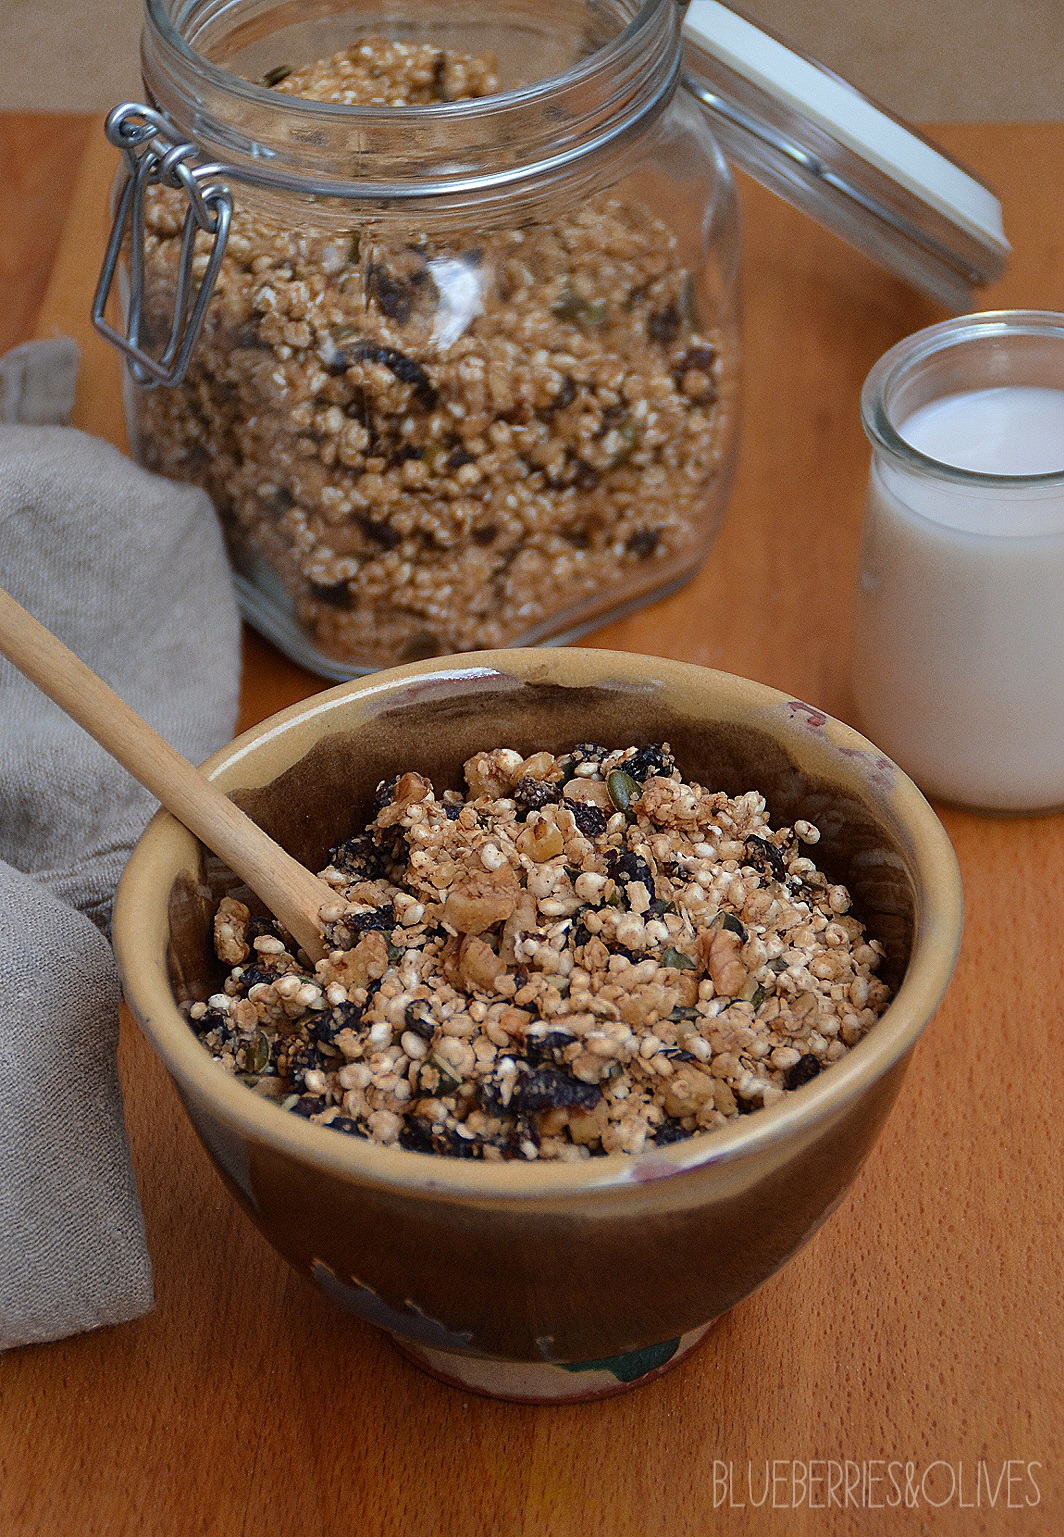 HOMEMADE MUESLI WITH CRANBERRIES, WALNUTS AND MAPLE SYRUP